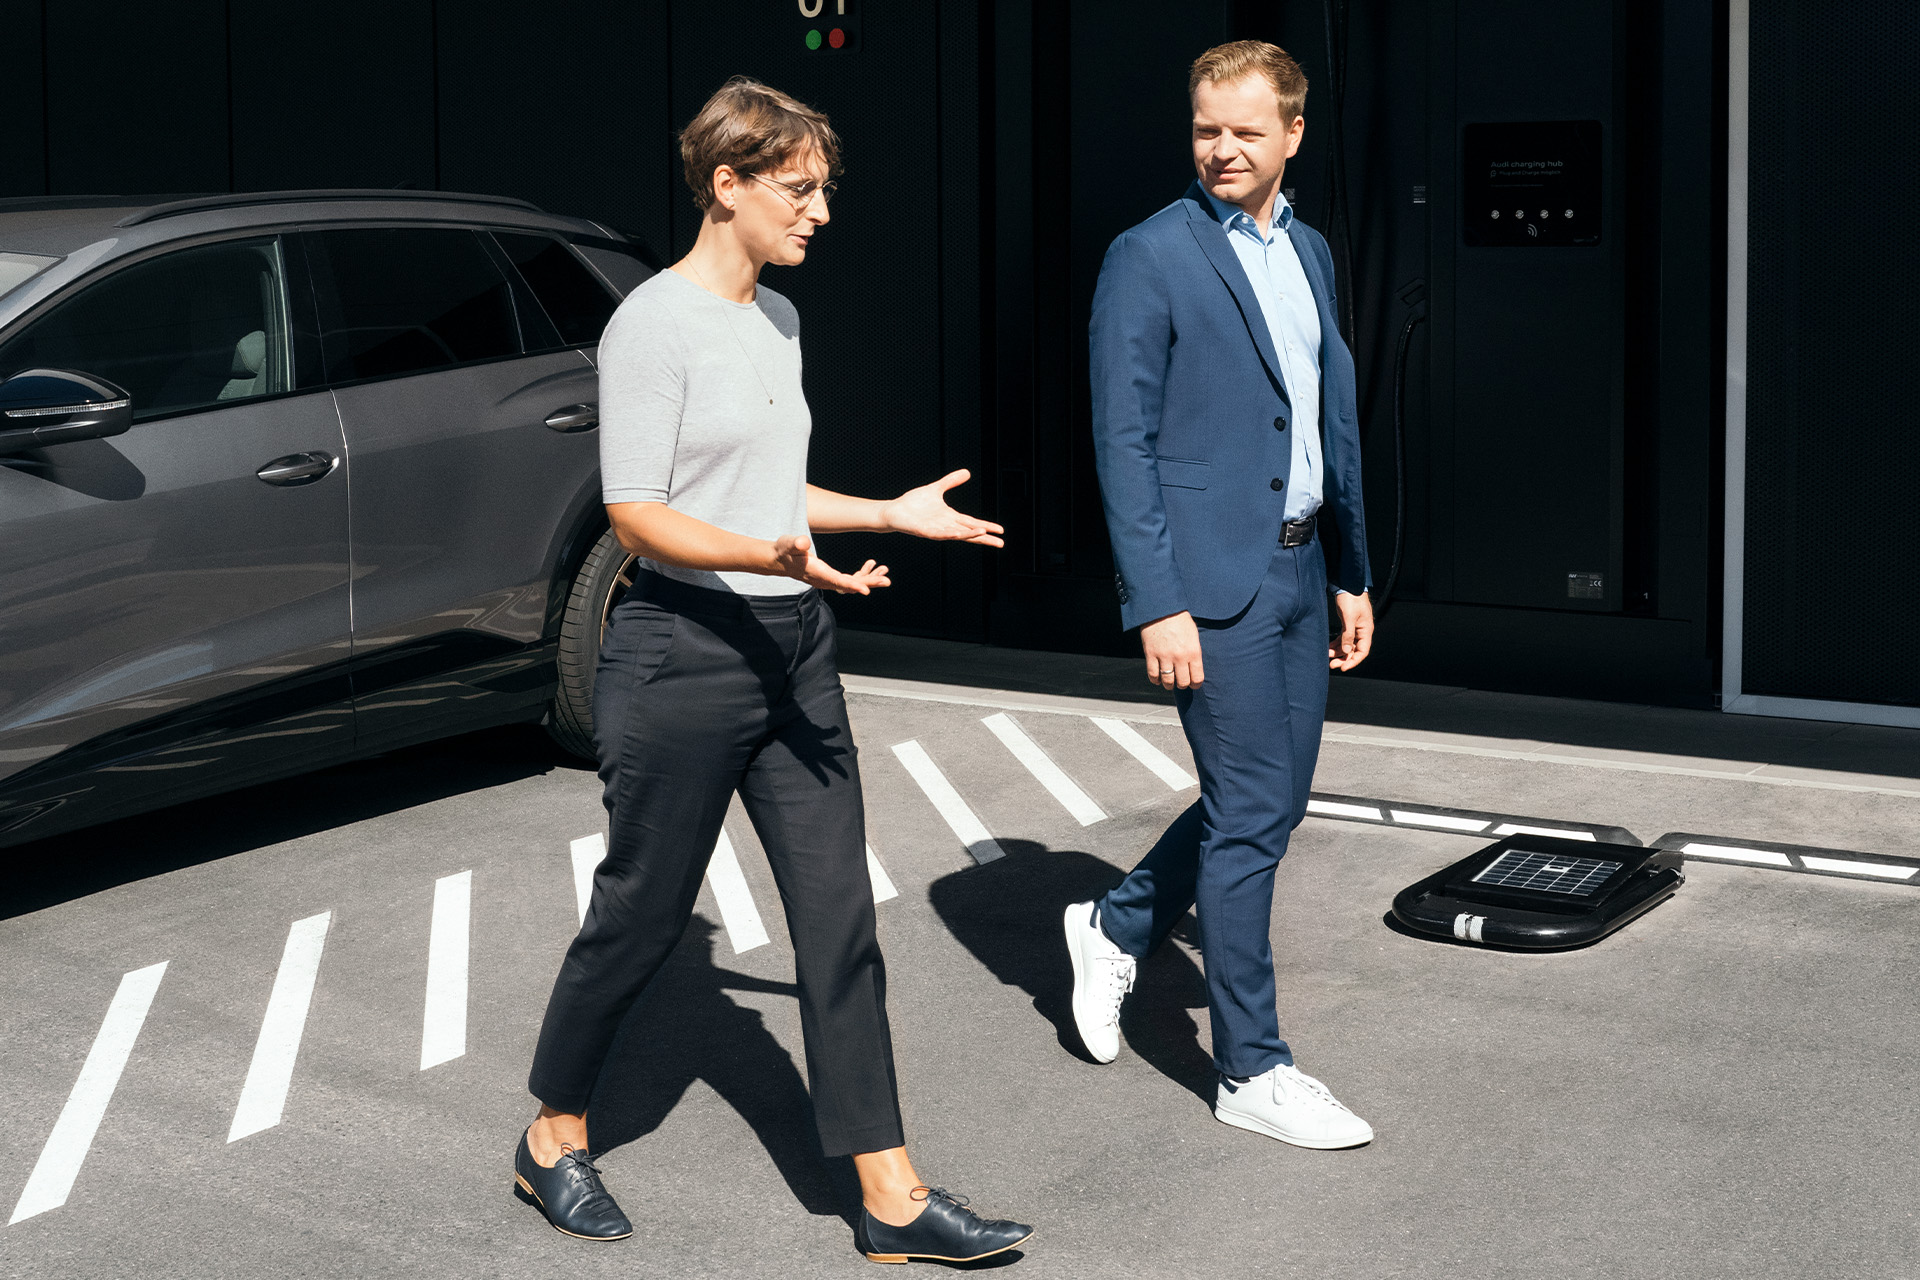 Sustainability experts Dr Johanna Klewitz and Malte Vömel walk across the parking lot in front of the Audi charging hub in Nuremberg.